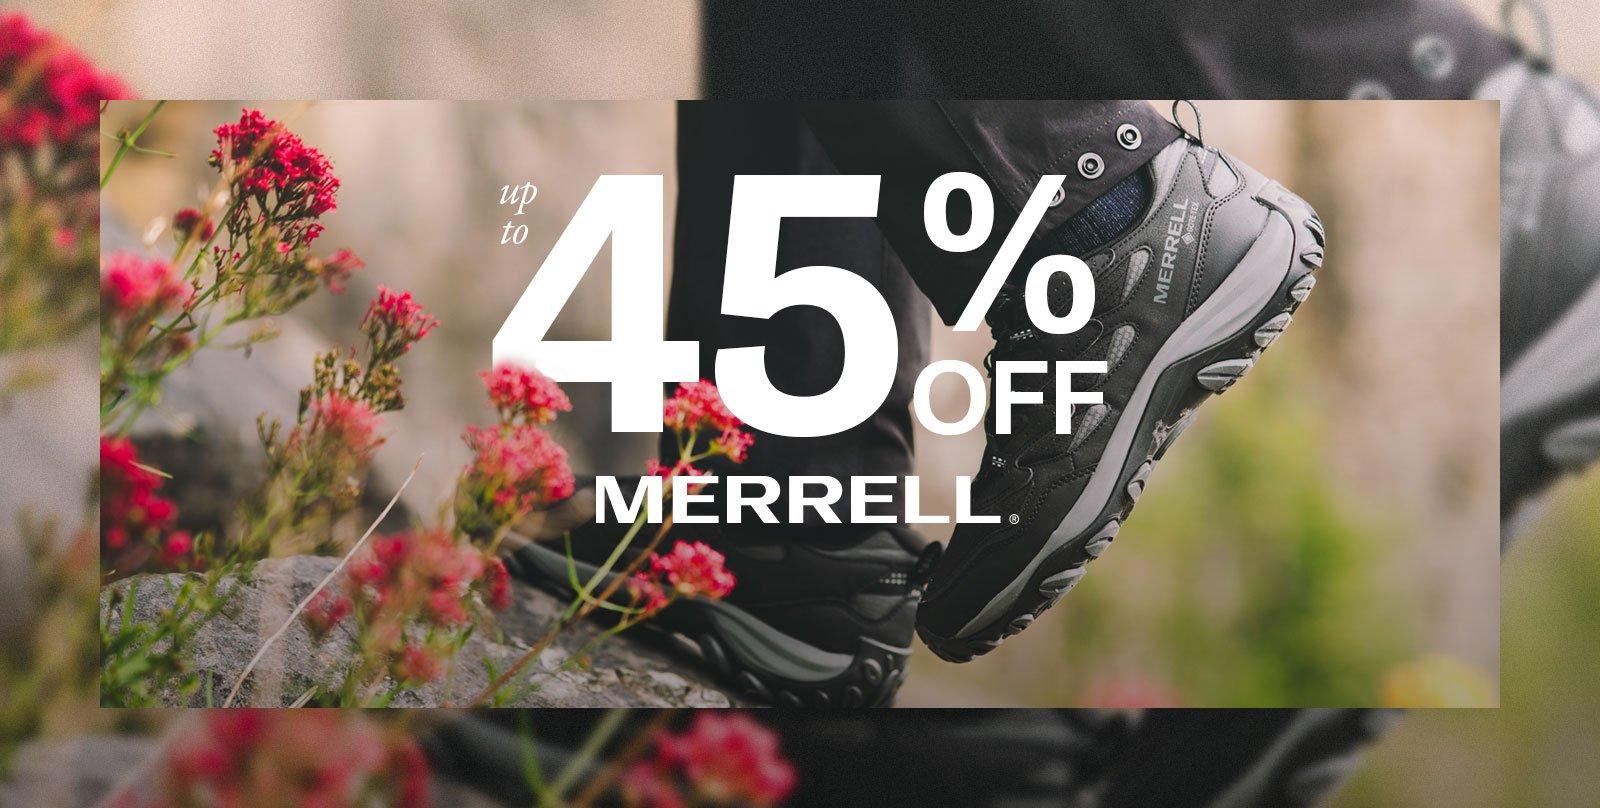 Up to 45% OFF Merrell